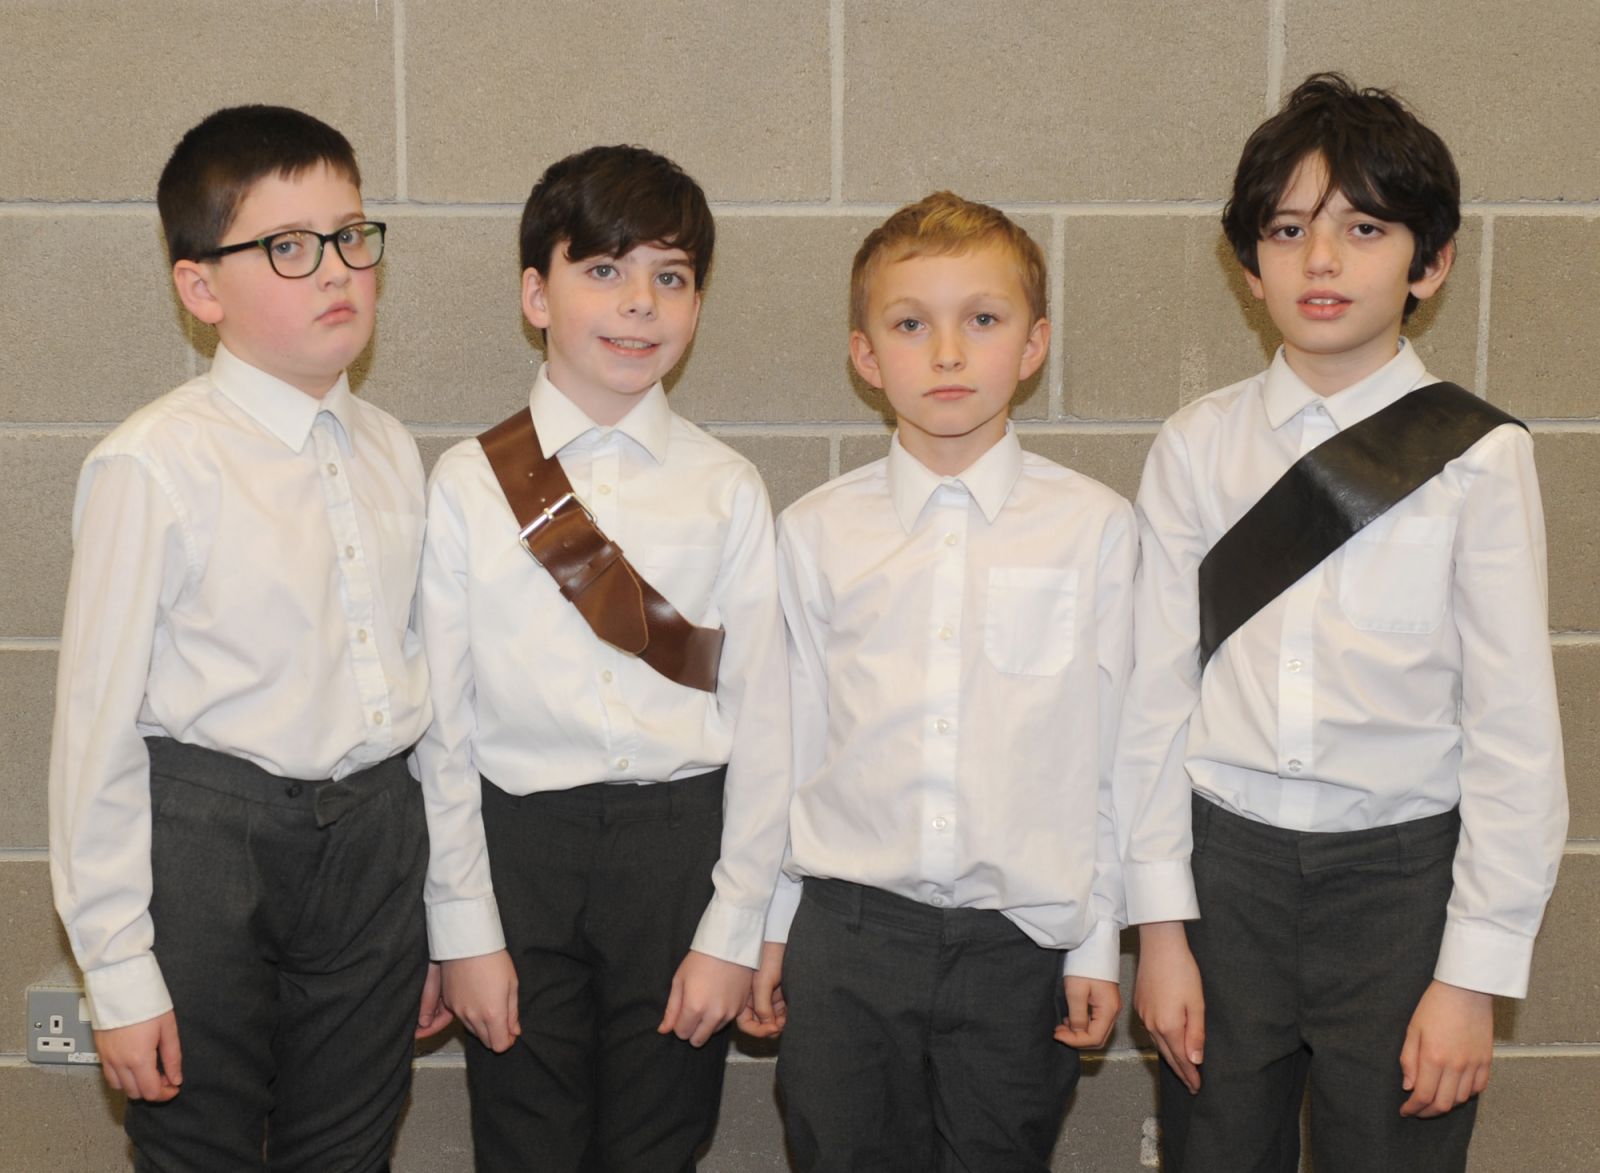 Patrick McElroy, Dáire Clarke, Jack Ives and Conor Landa who were cast members in the Musical 'The Sound of Music' at Dundalk Grammar Junior School. Photo: Aidan Dullaghan/Newspics